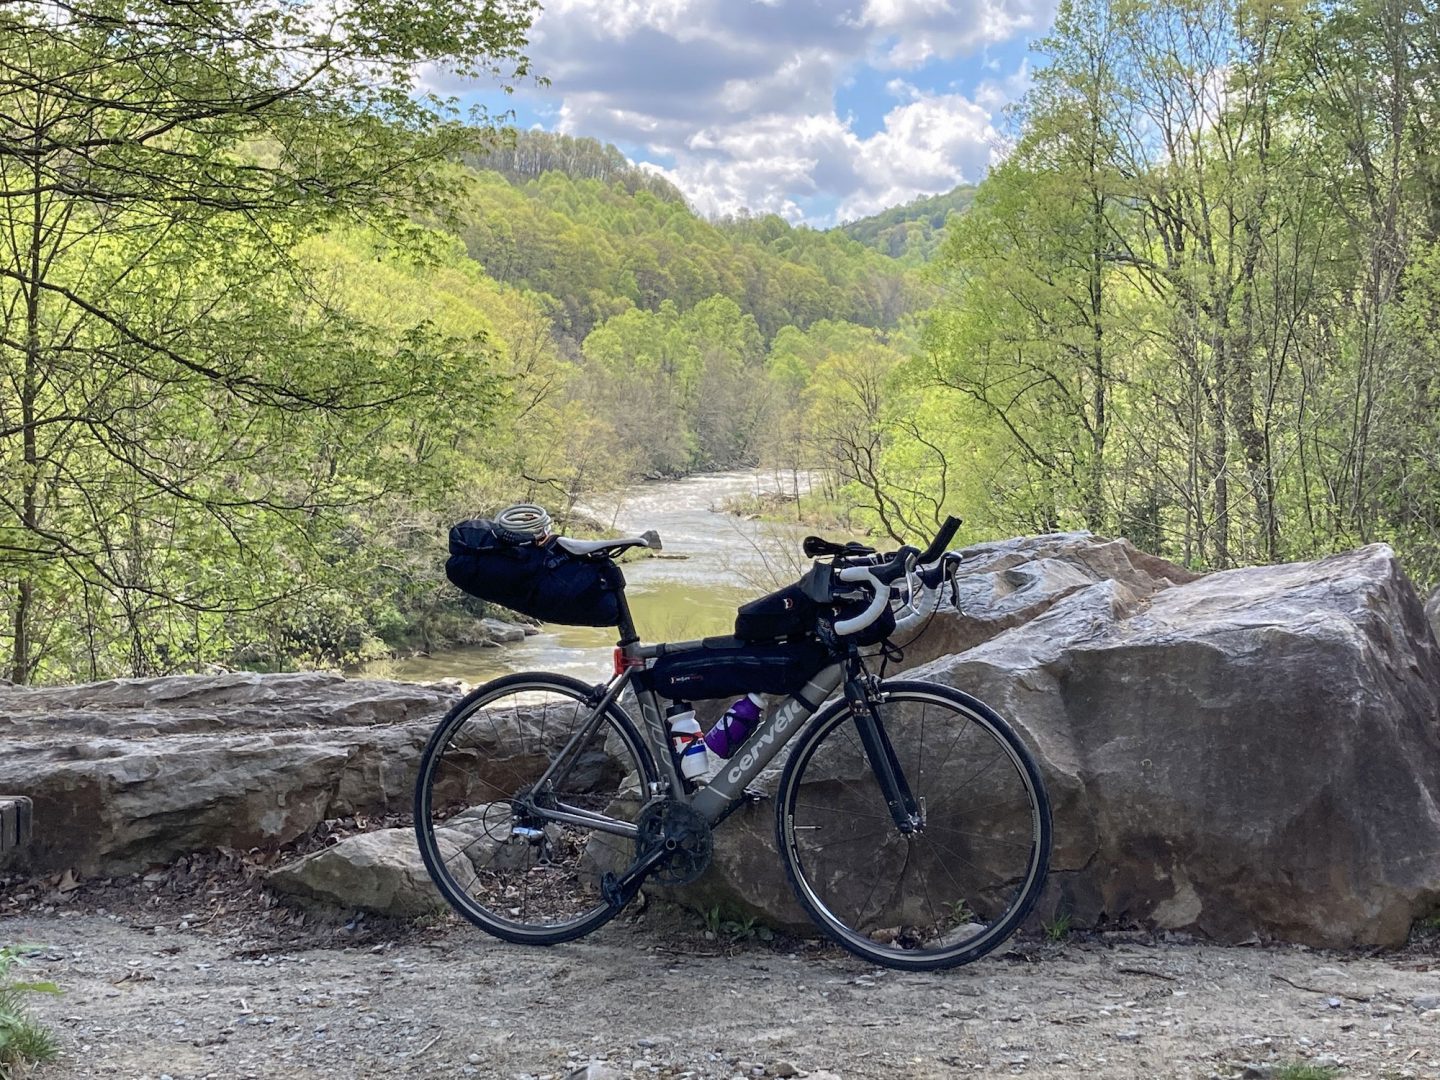 A bike is pictured at an overlook just before Ohiopyle.